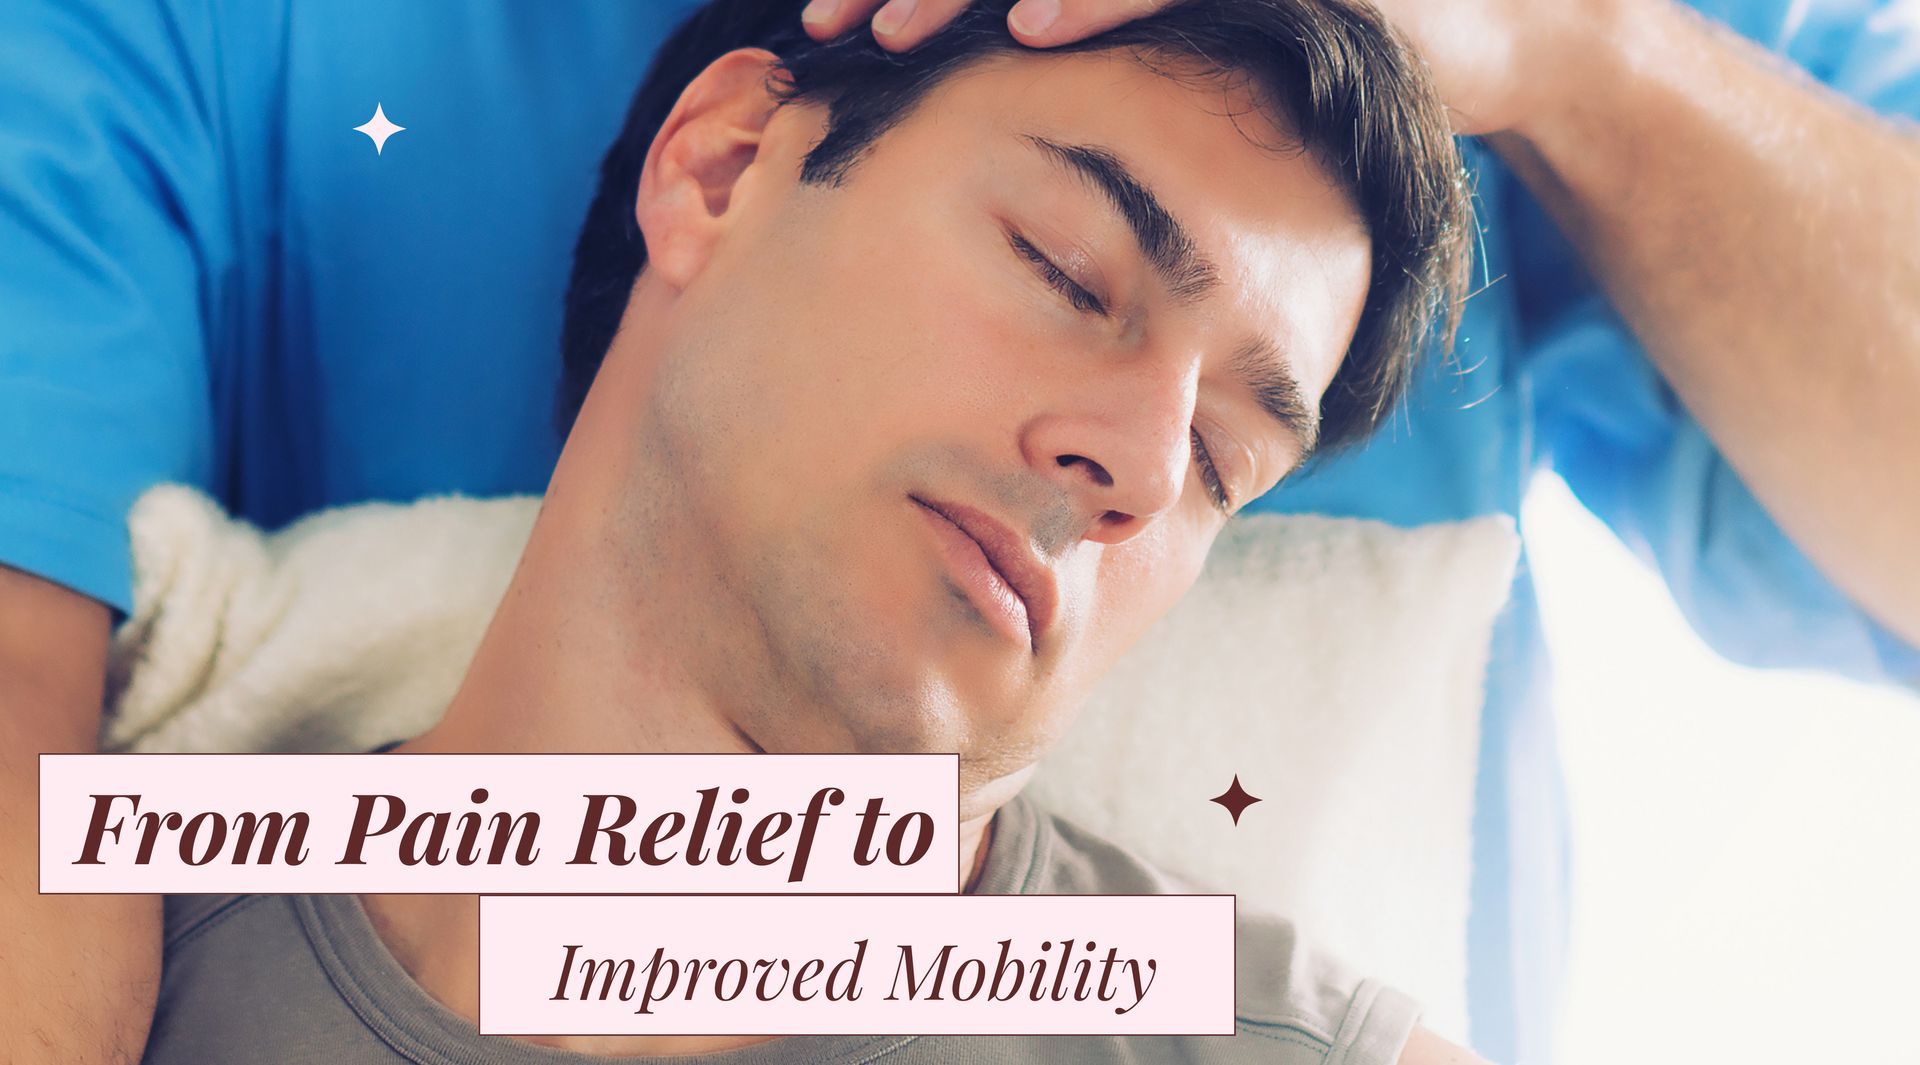 From Pain Relief to Improved Mobility